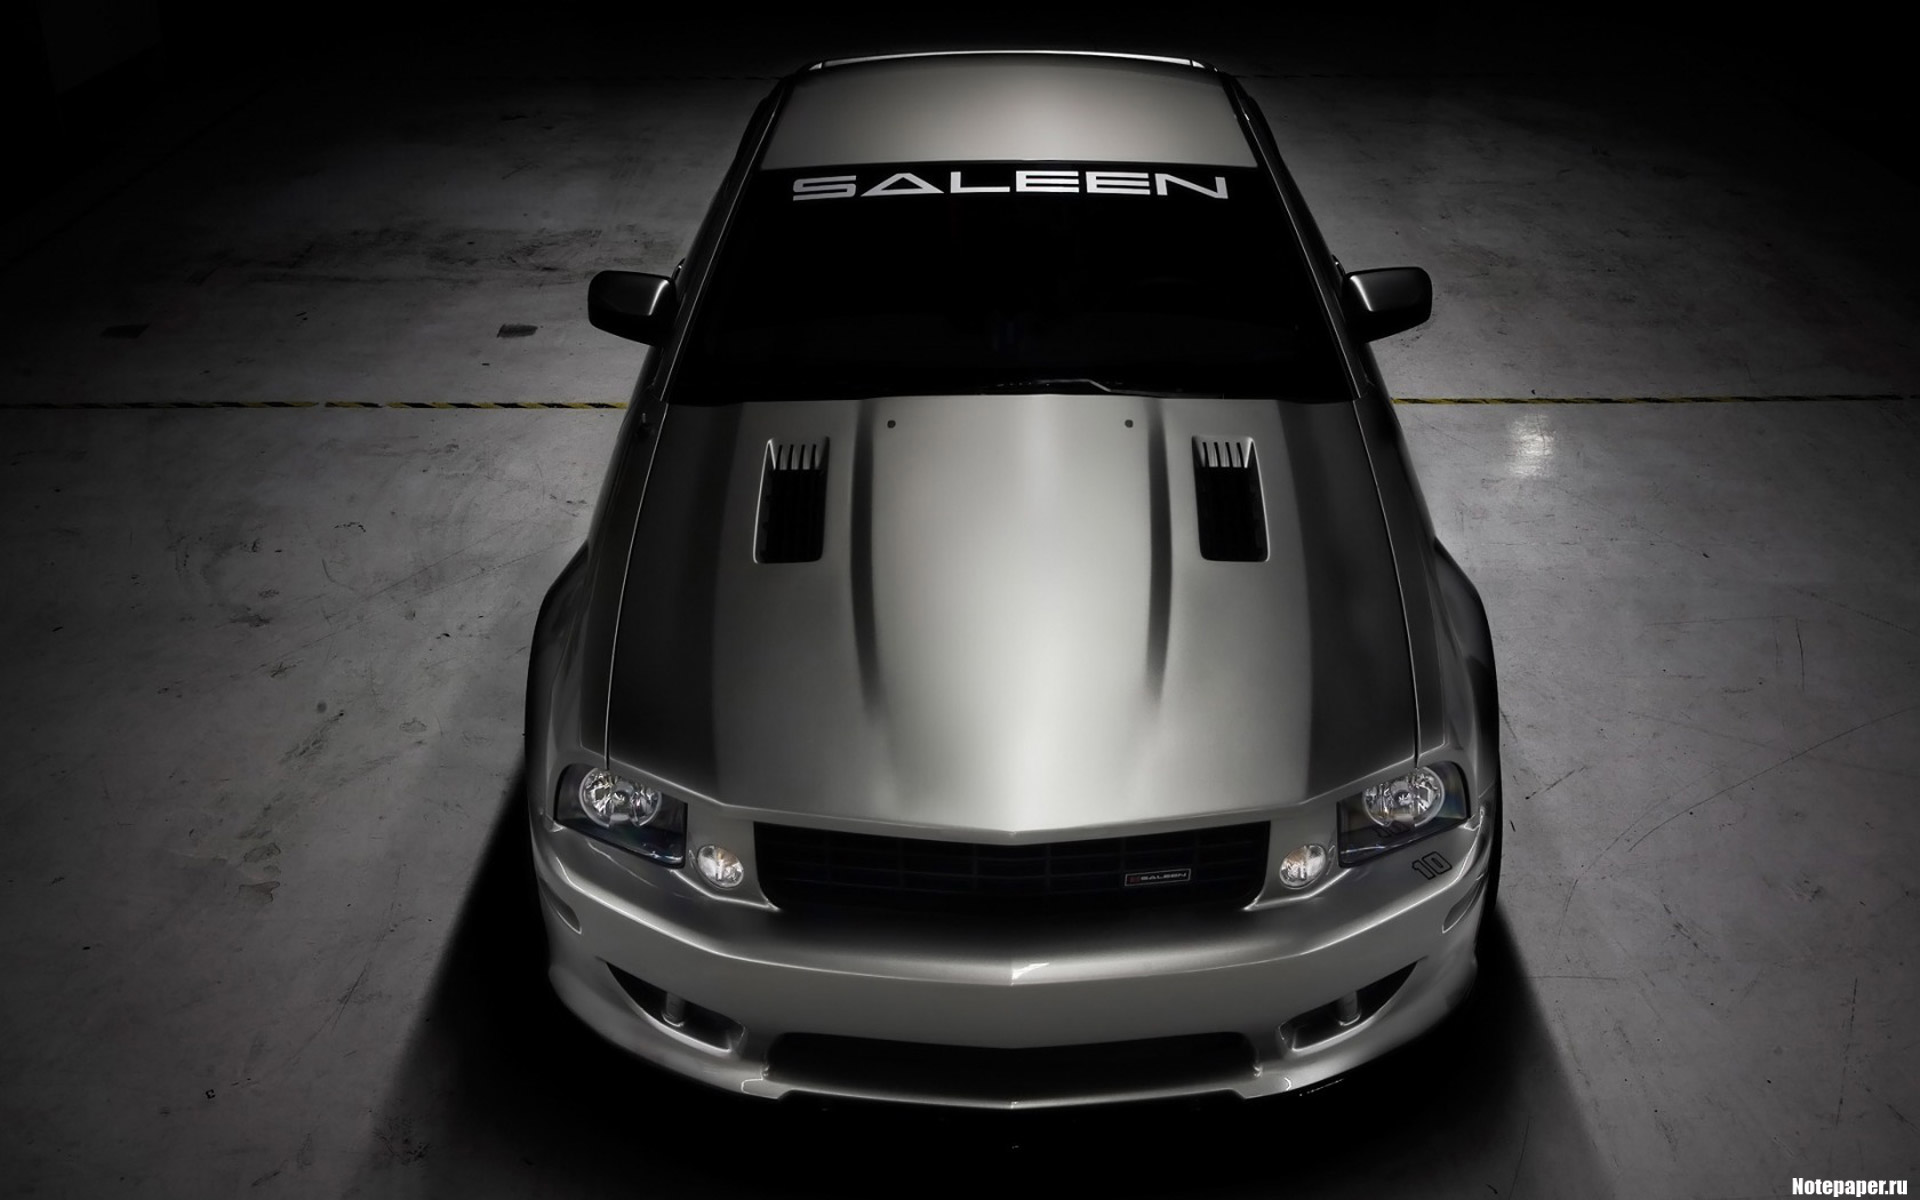 Wallpapers Ford Mustang muscular on the desktop